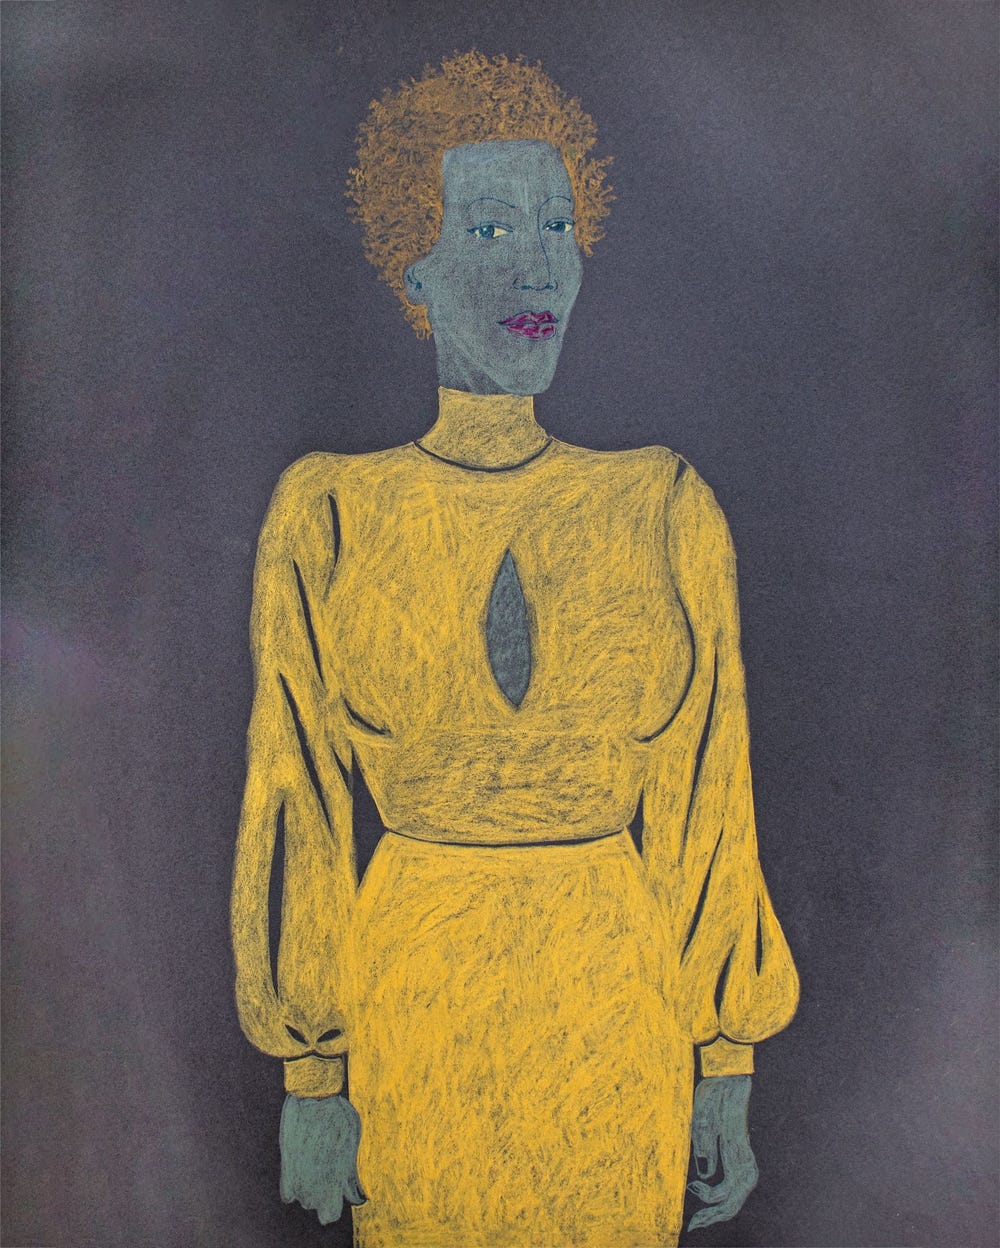 Portrait of Amy Sherald in a yellow dress